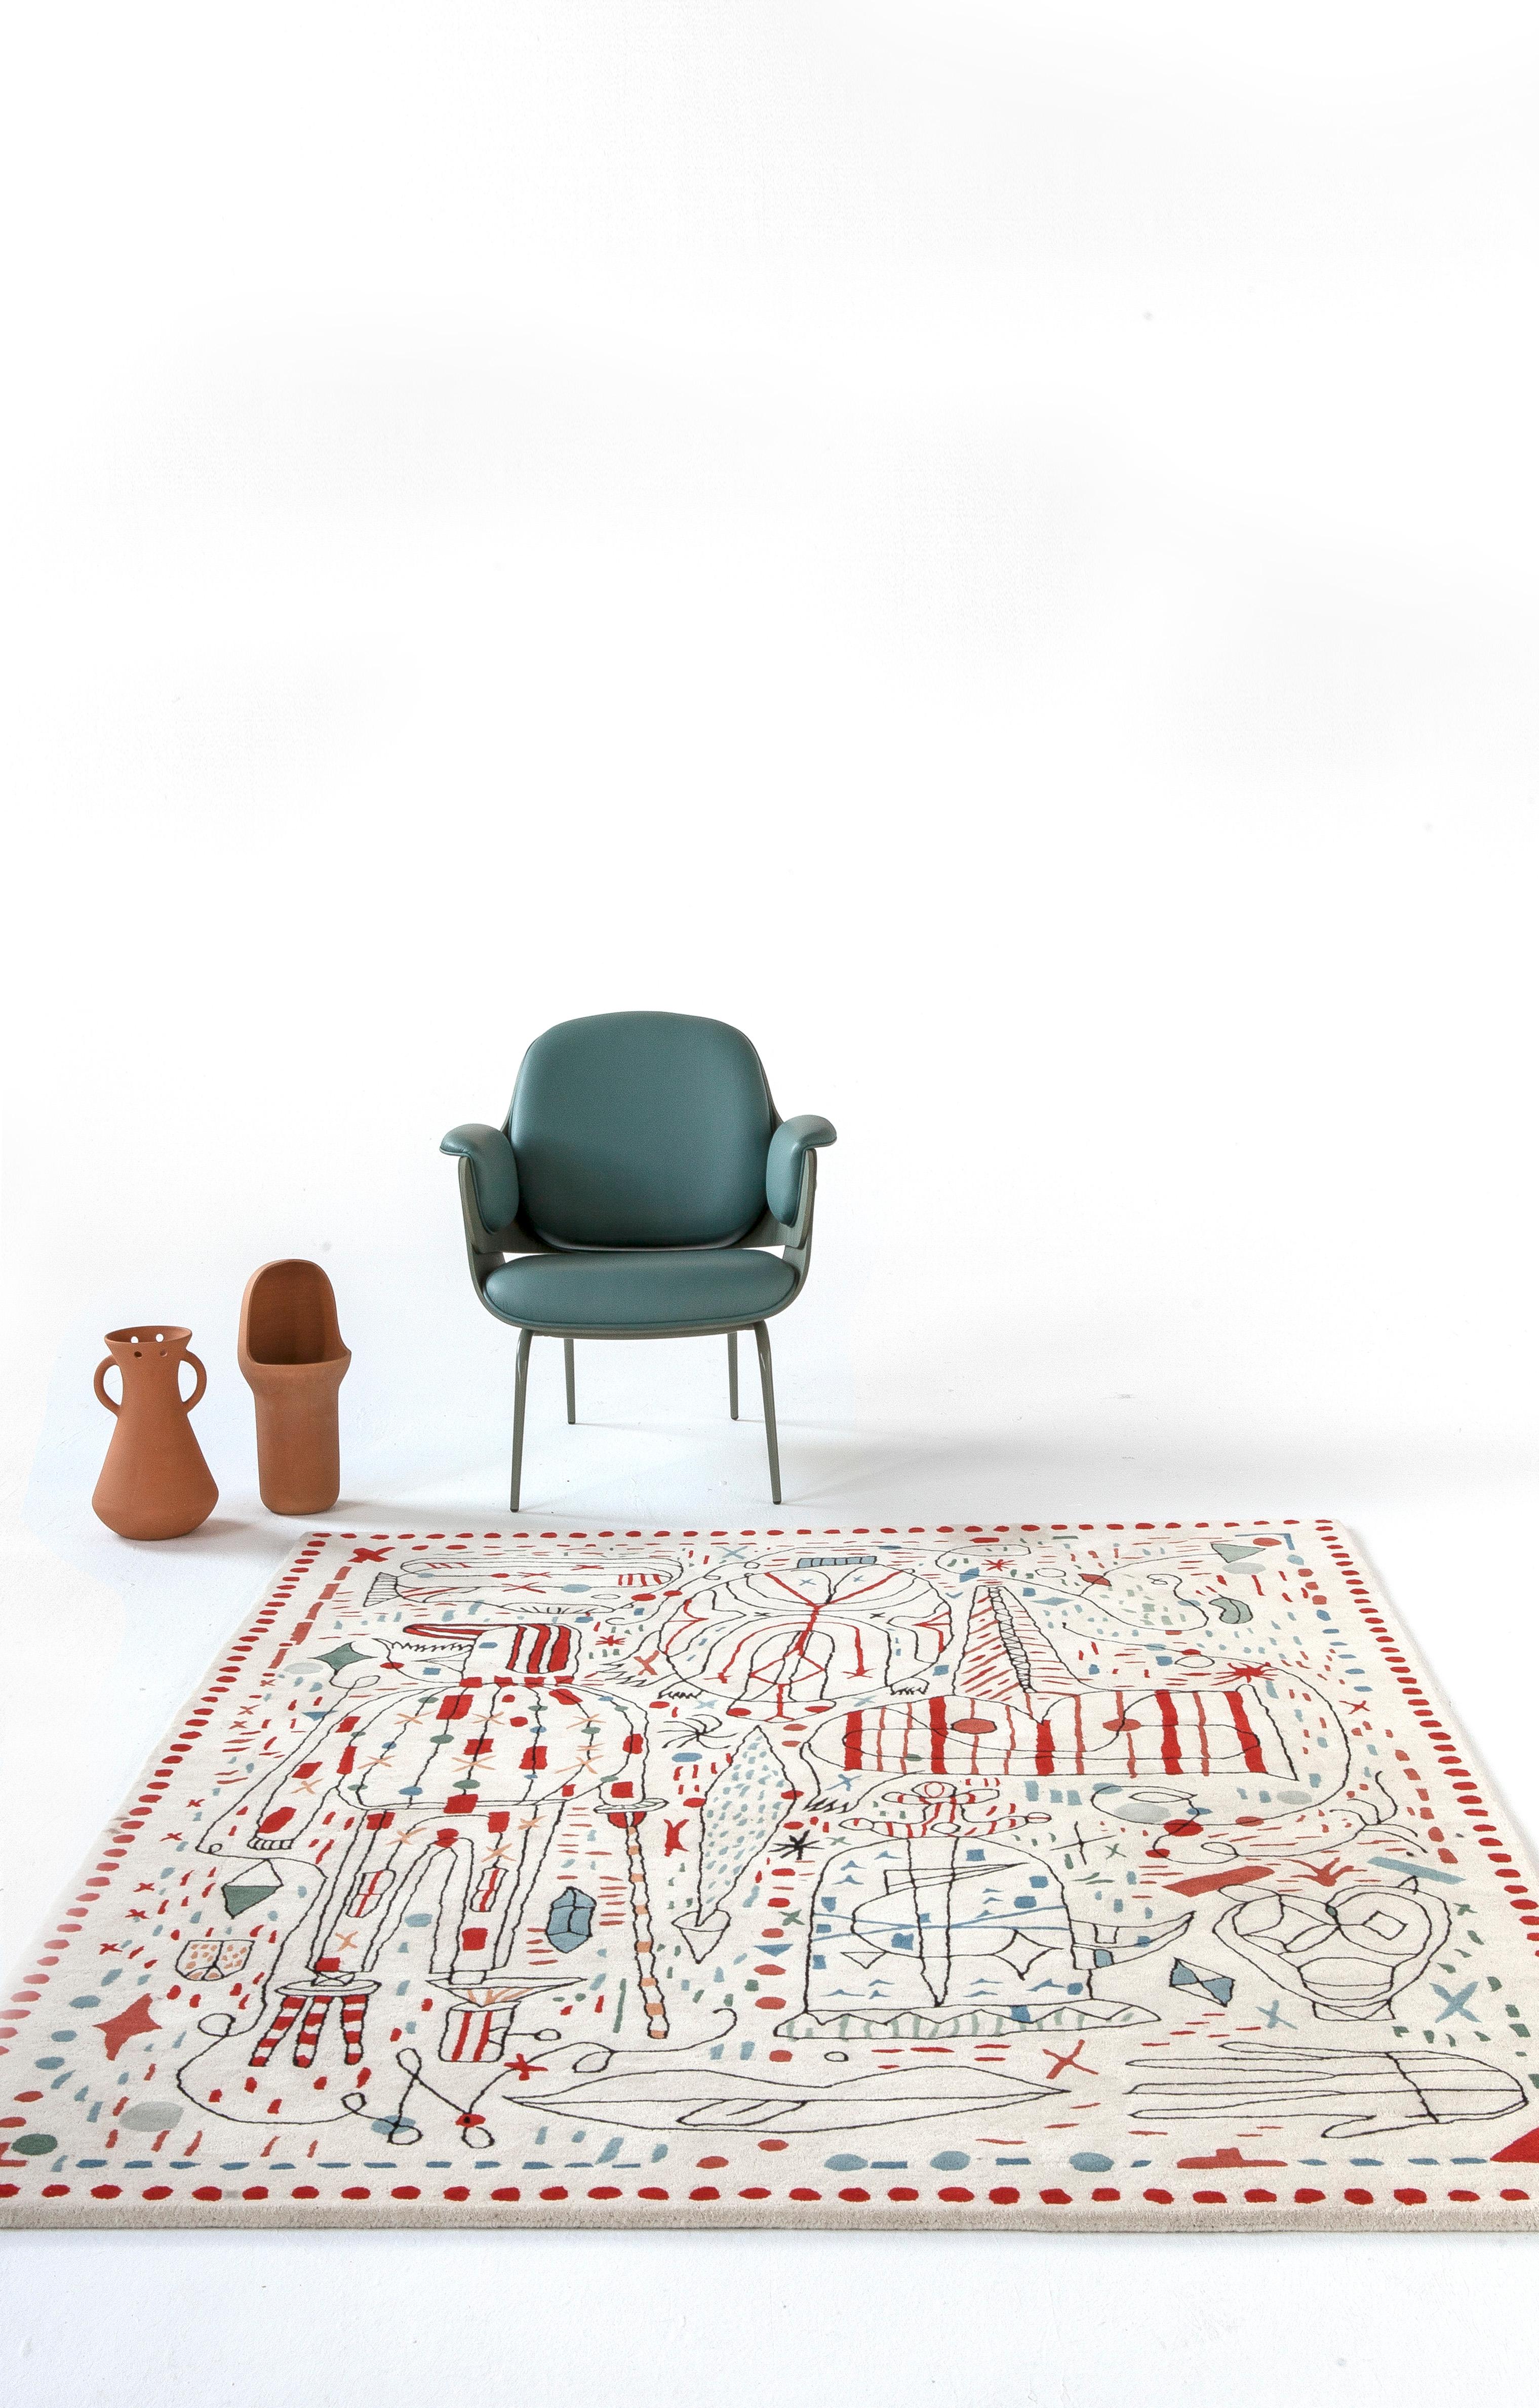 'Hayon x Nani' Hand-Tufted Rug or Tapestry by Jaime Hayon for Nanimarquina For Sale 5